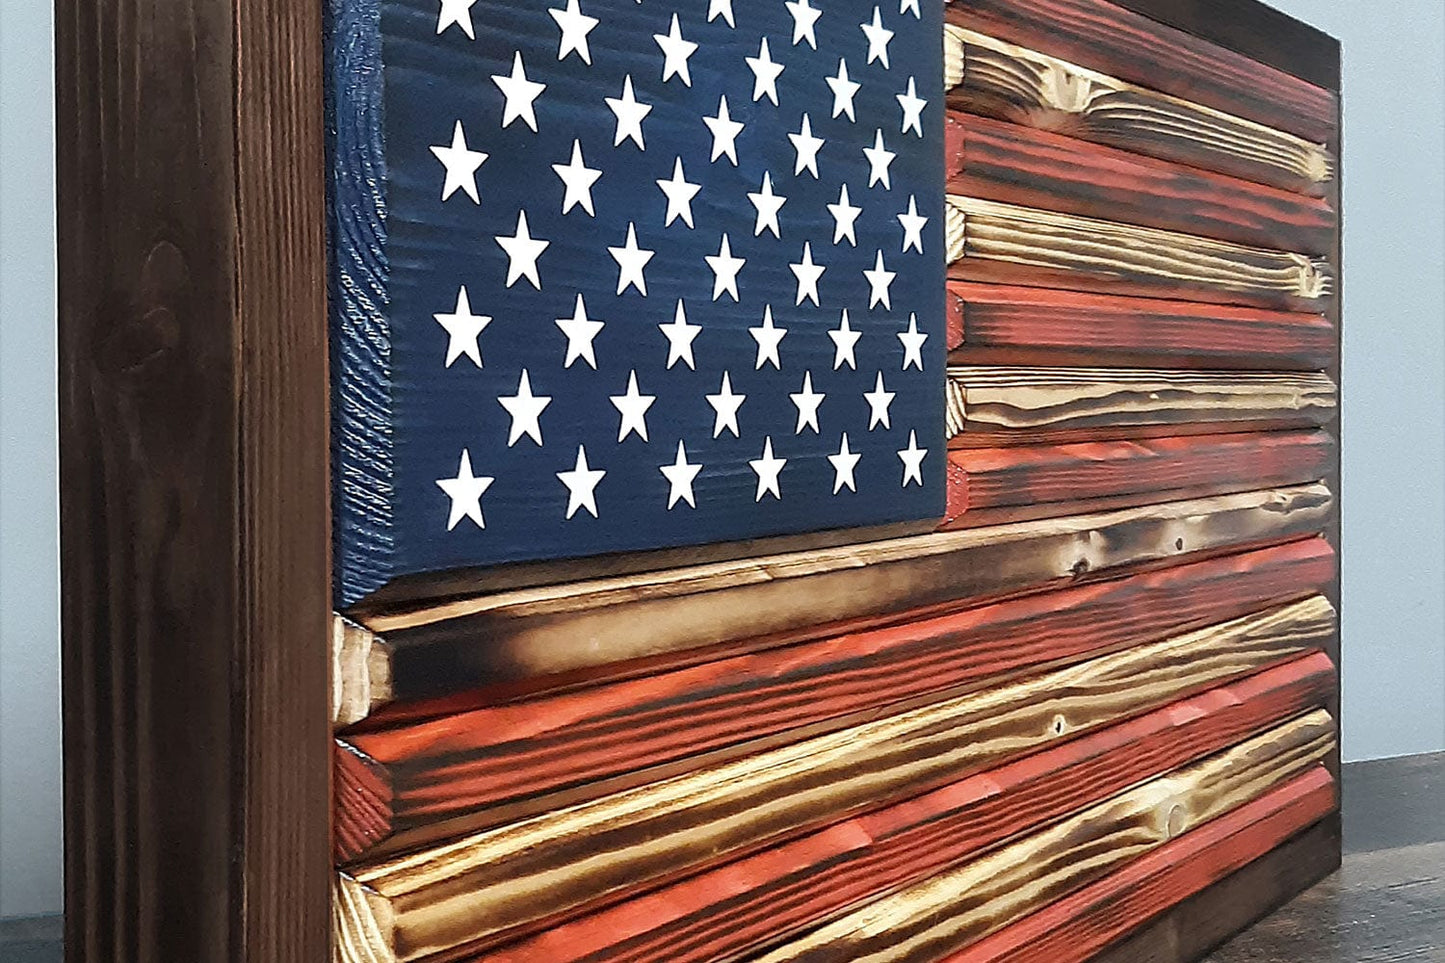 Framed Rustic Wooden American Flag, Handcrafted Woodworking by Eric